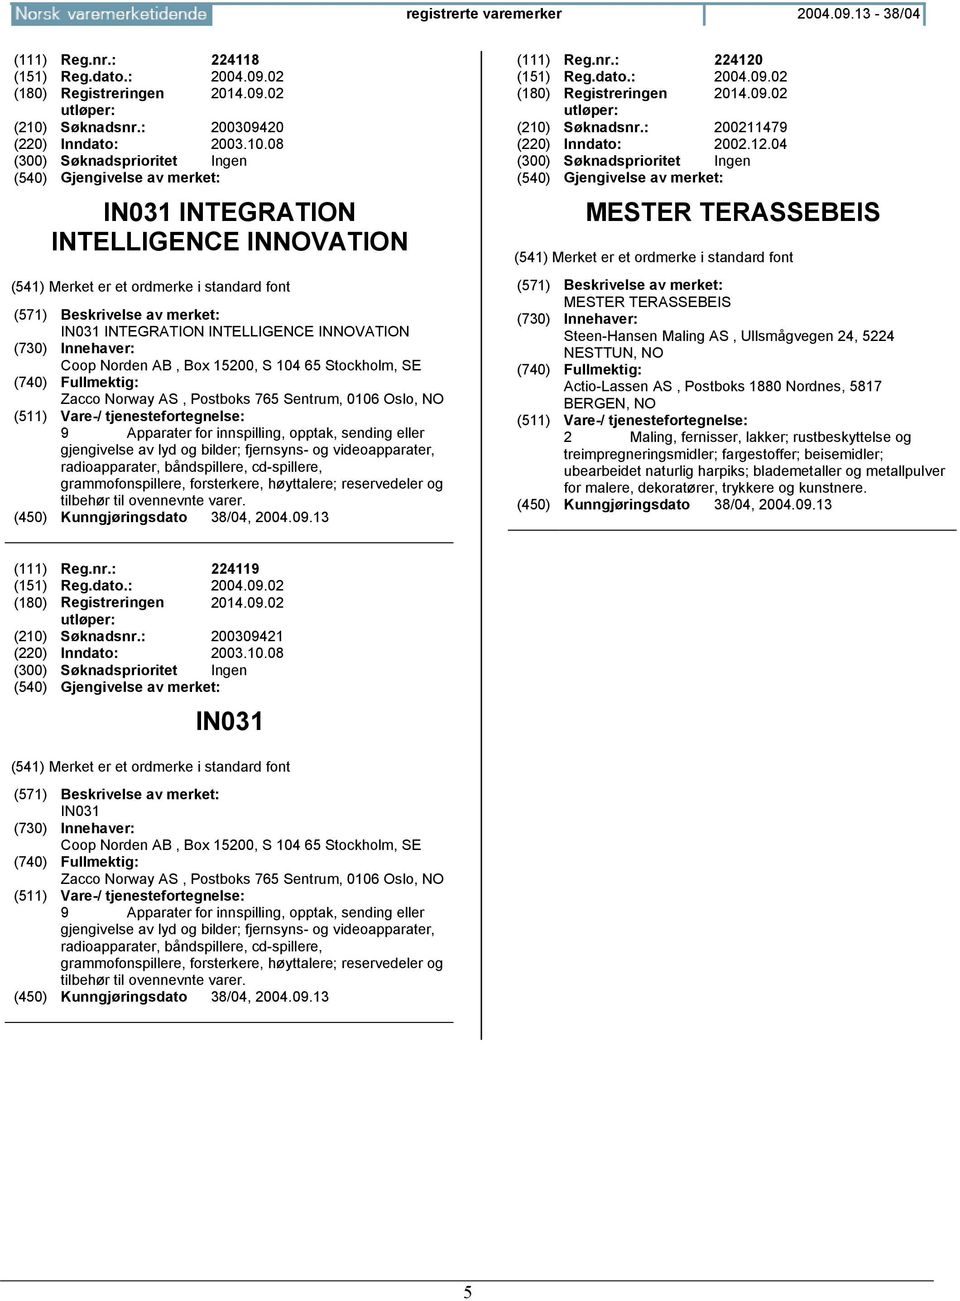 08 IN031 INTEGRATION INTELLIGENCE INVATION IN031 INTEGRATION INTELLIGENCE INVATION Coop Norden AB, Box 15200, S 104 65 Stockholm, SE Zacco Norway AS, Postboks 765 Sentrum, 0106 Oslo, 9 Apparater for